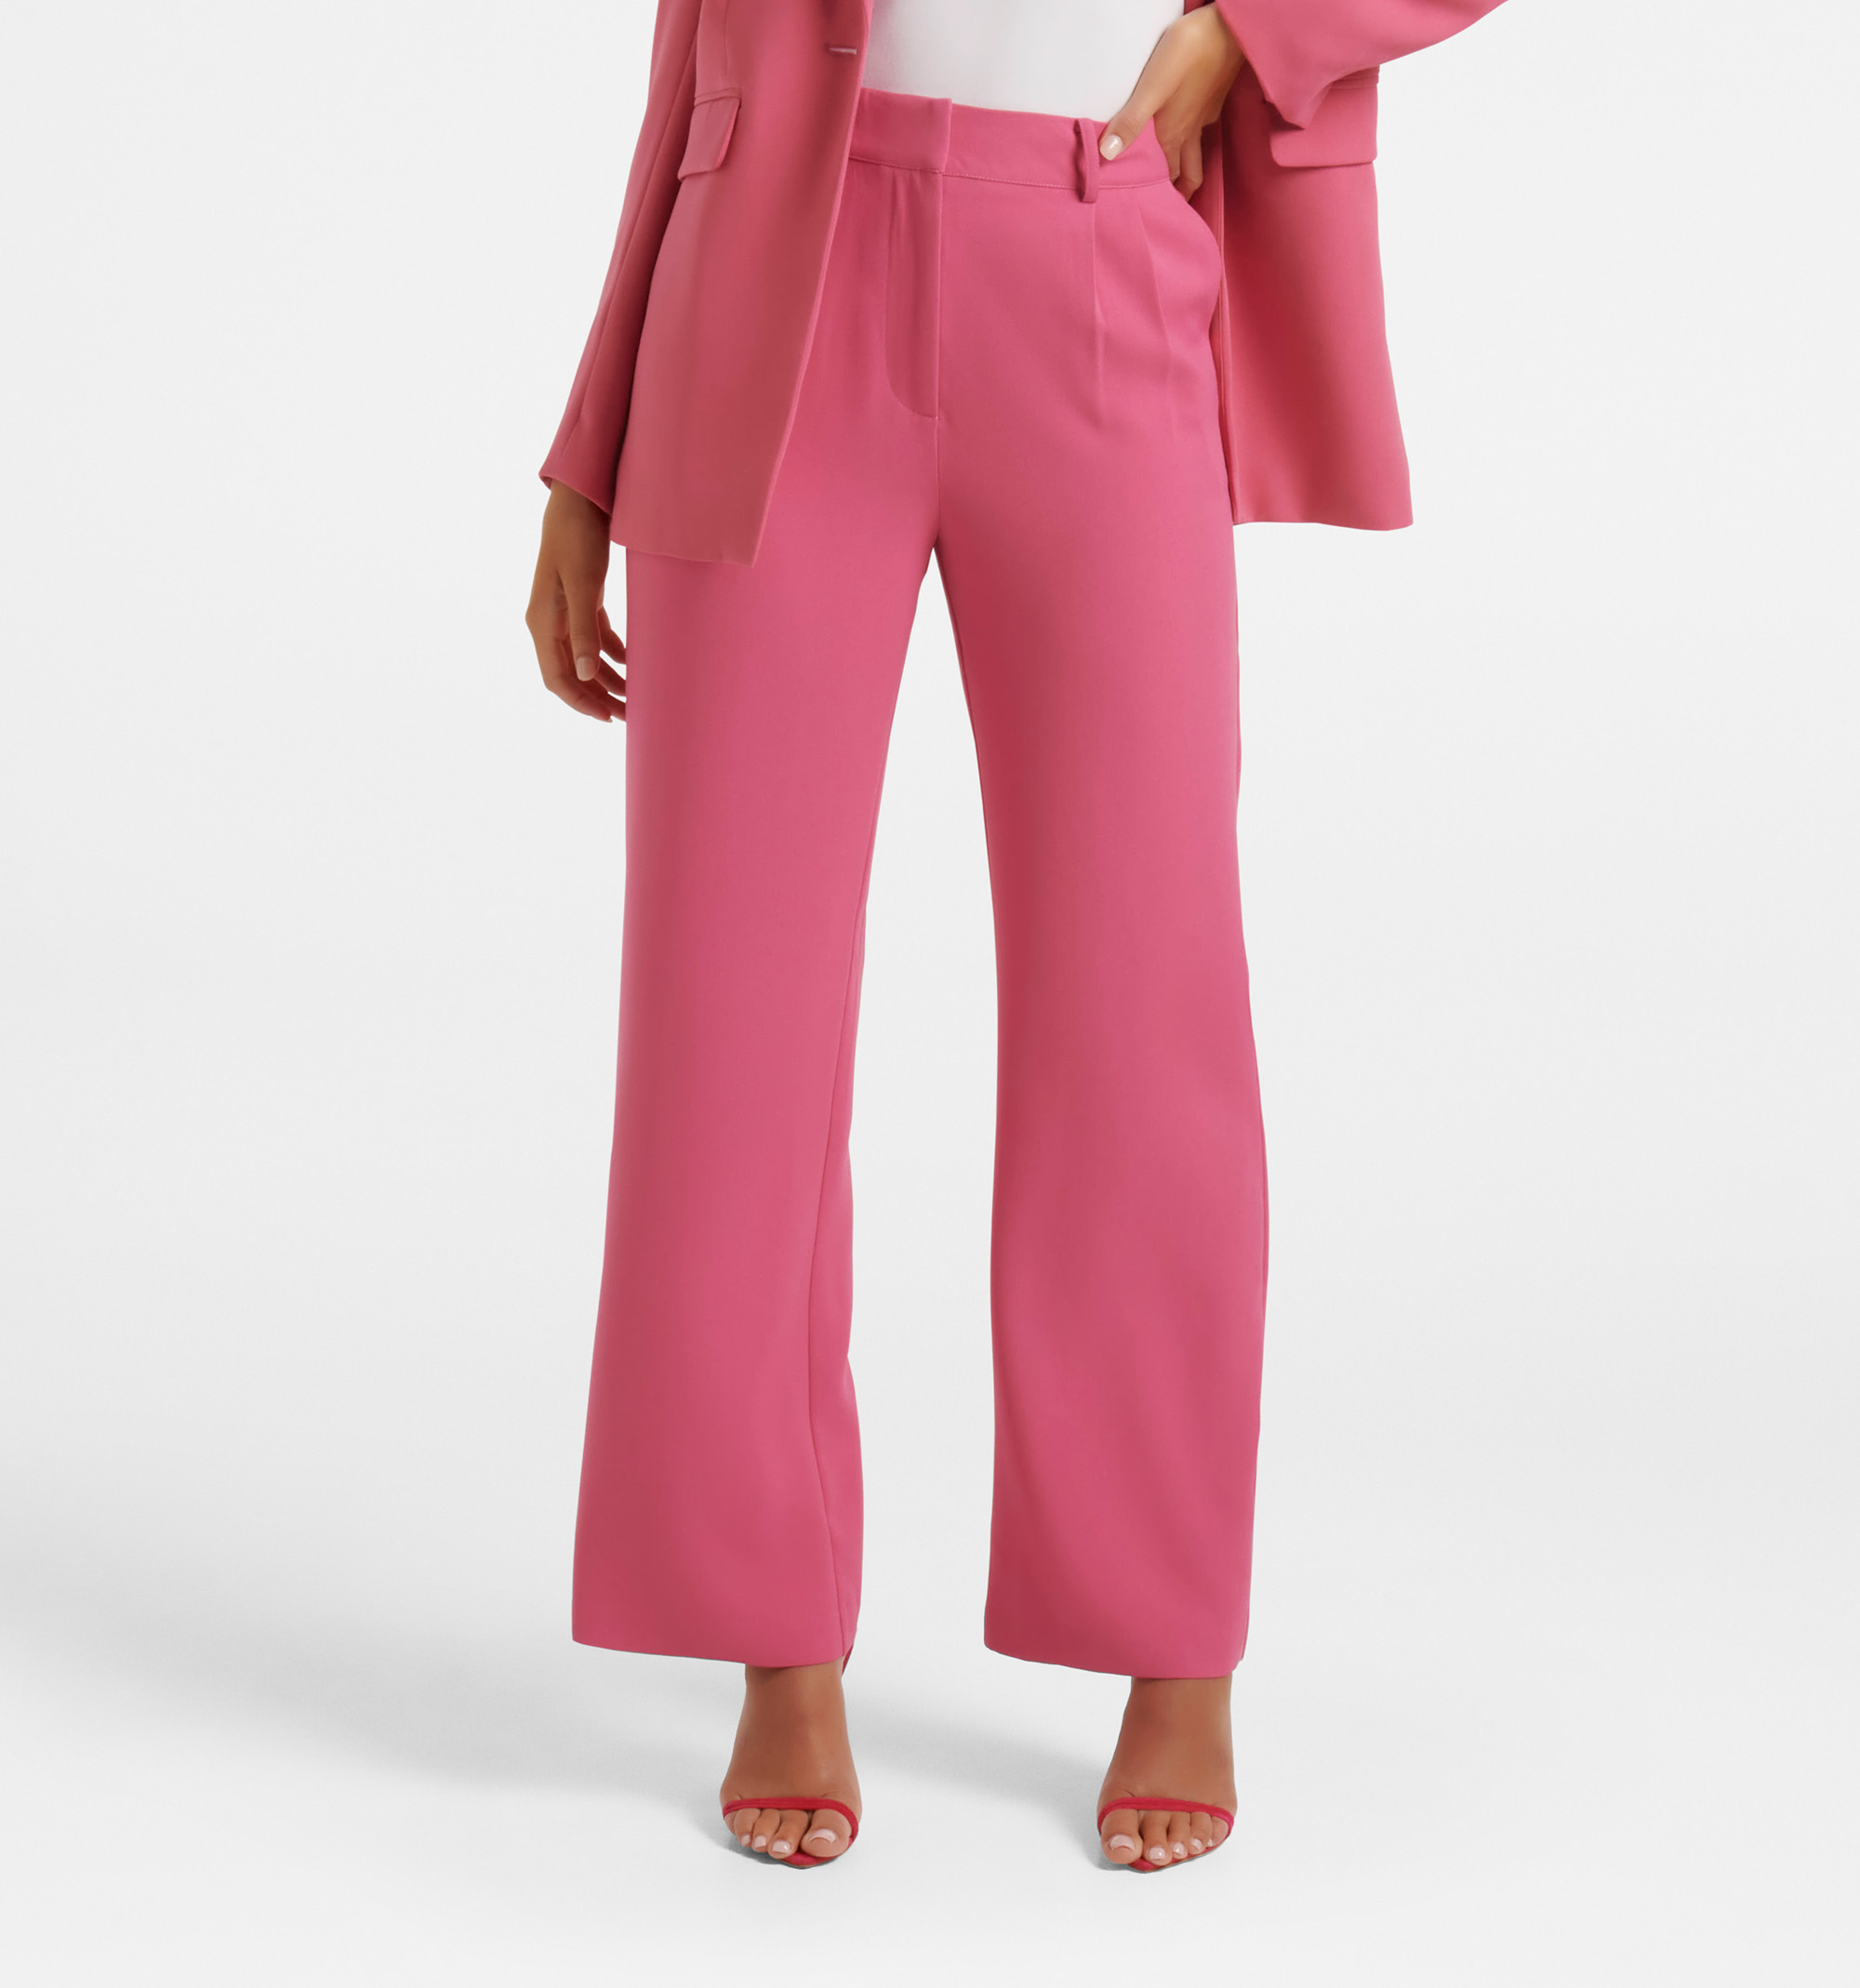 Women's Straight Fit pants - Off-White